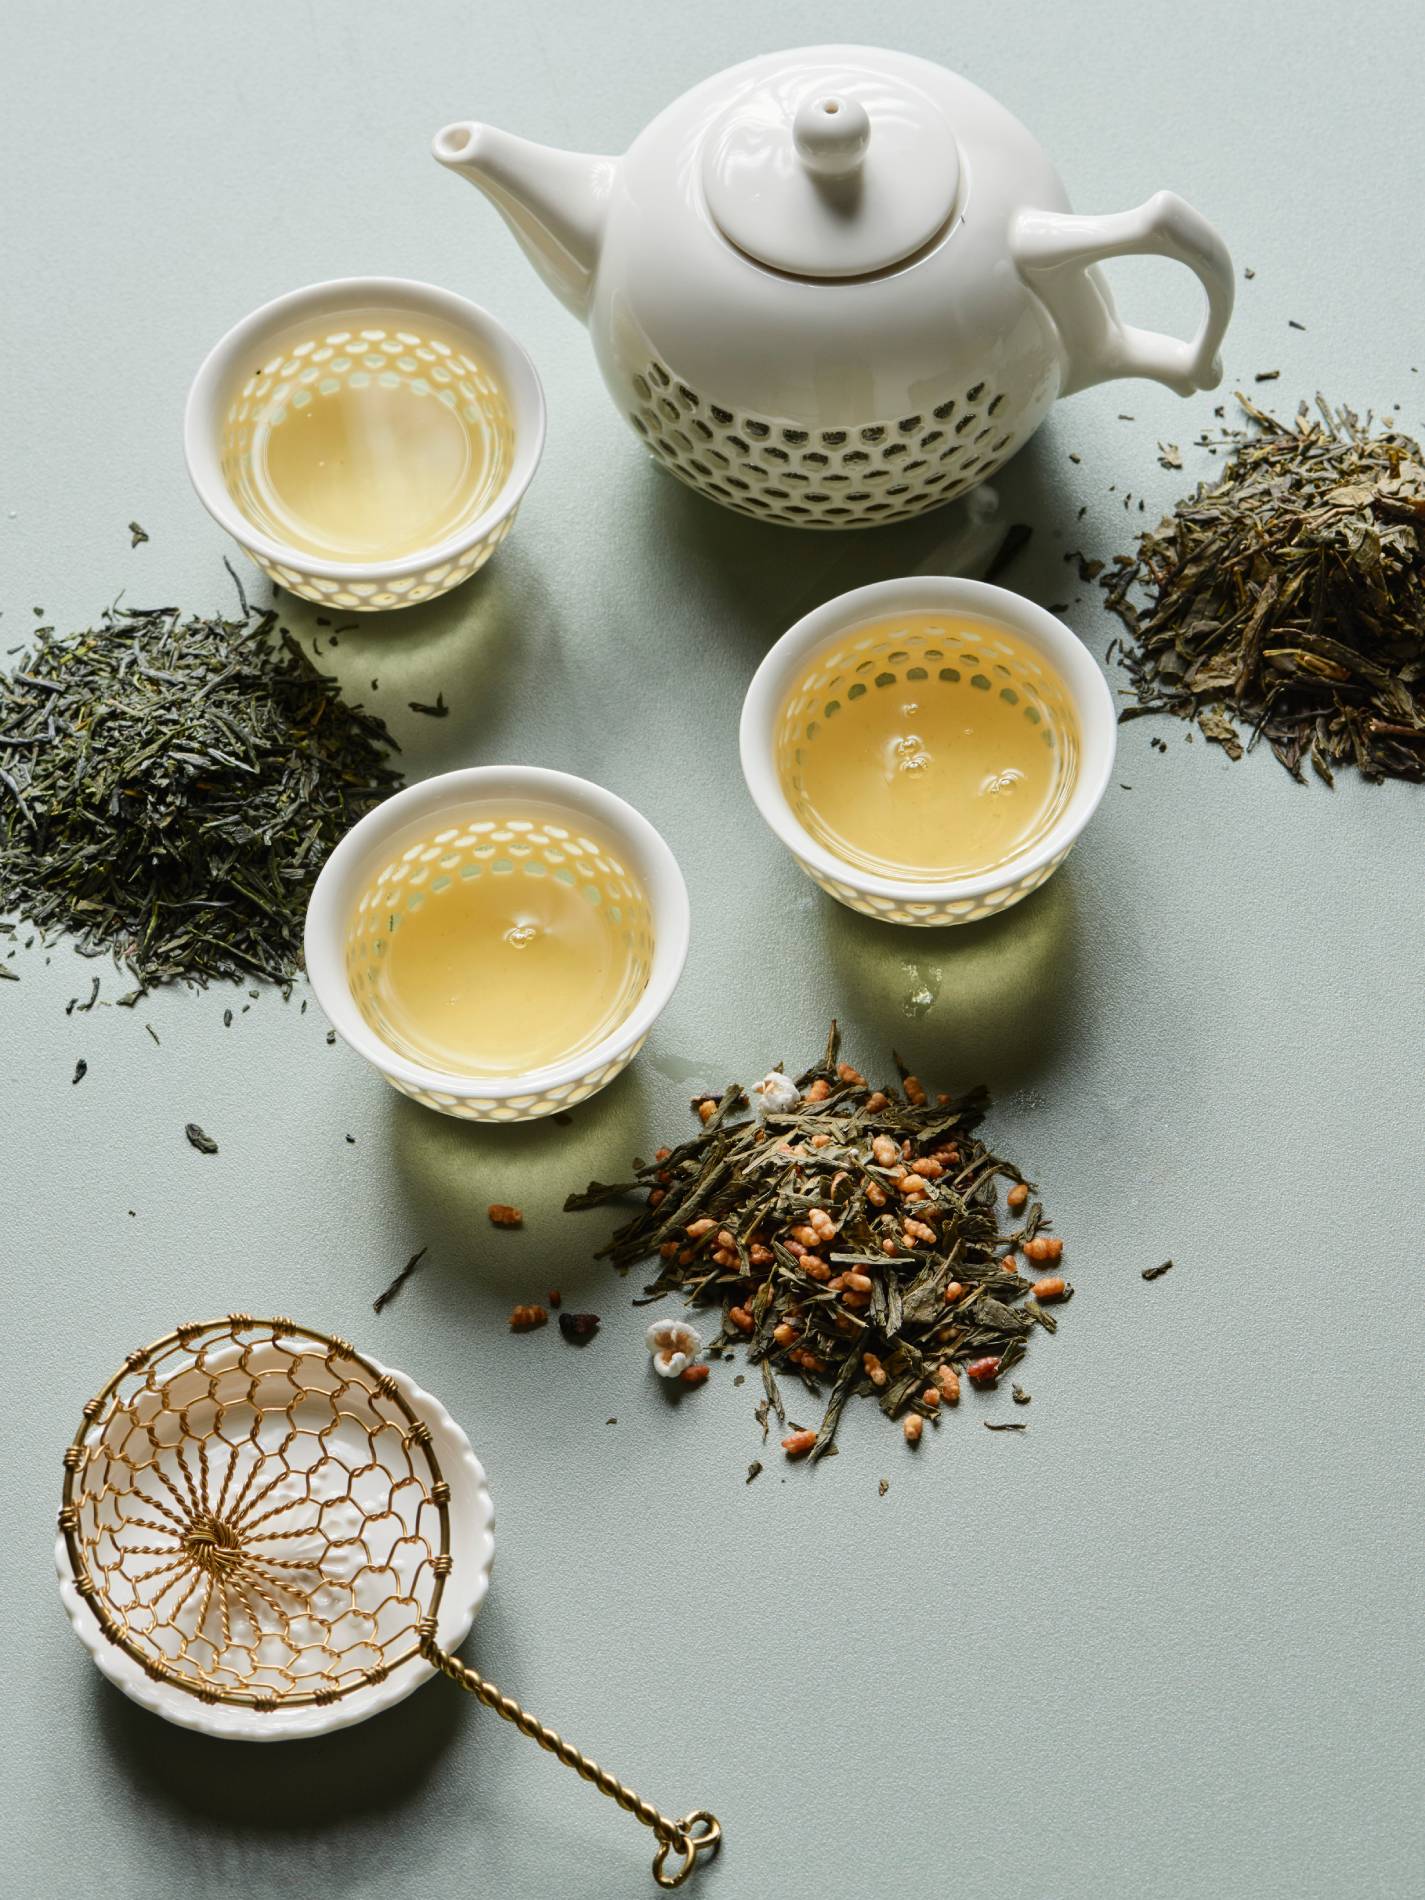 Here are the world's best teas (for your High Tea)